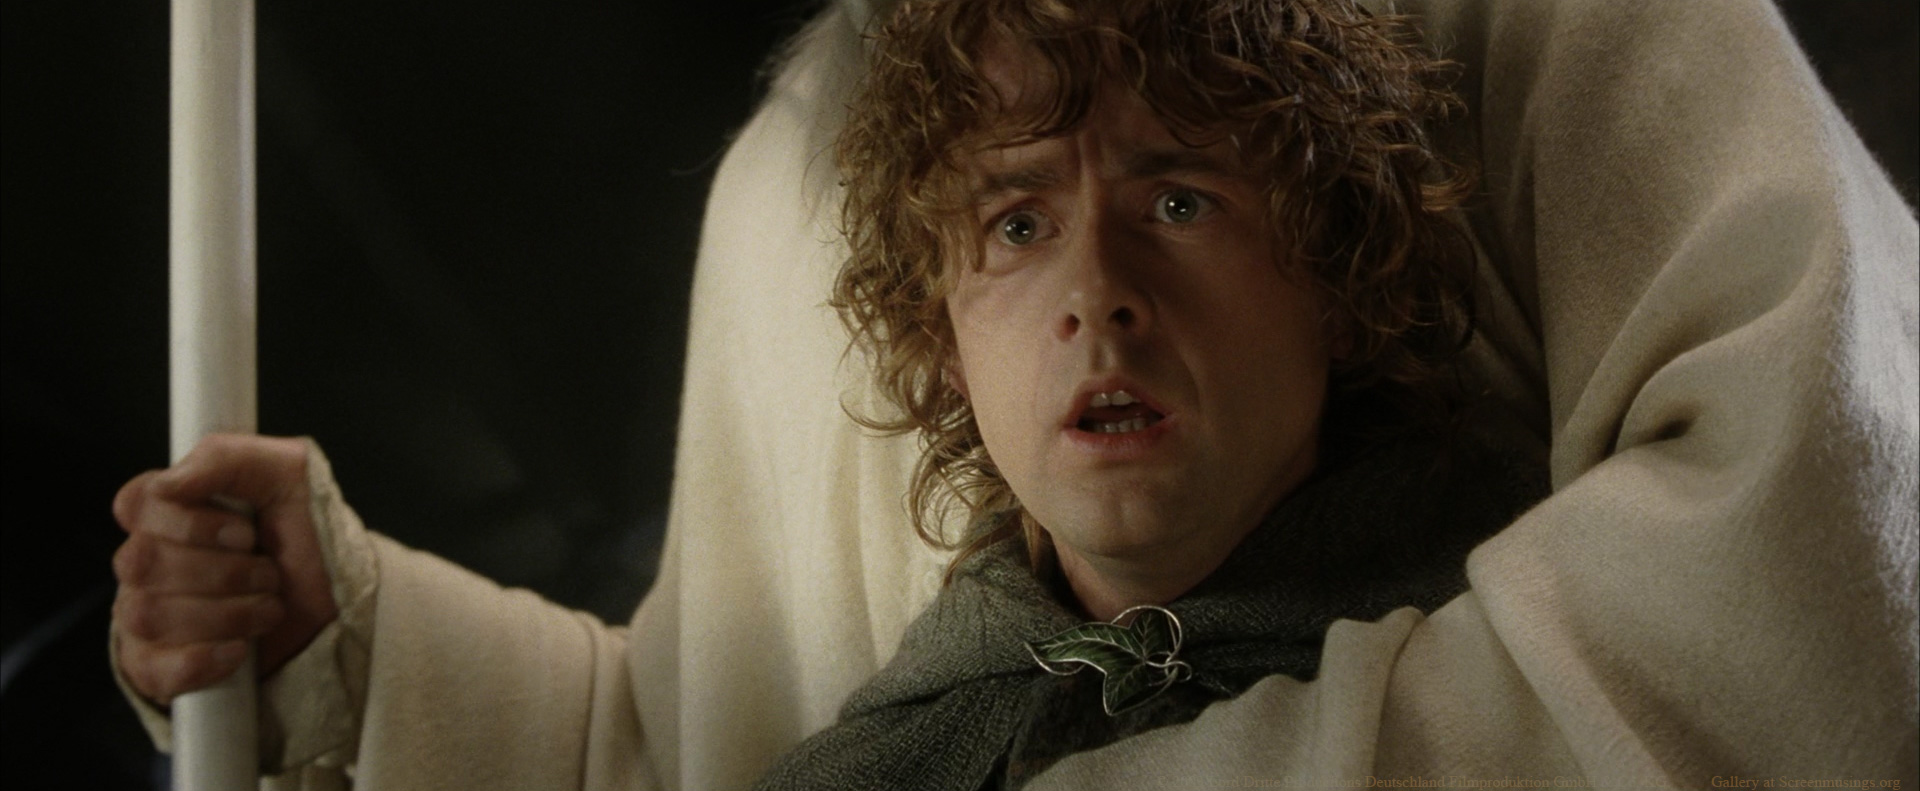 Pippin, Billy Boyd in The Lord of the Rings: The Return of the King